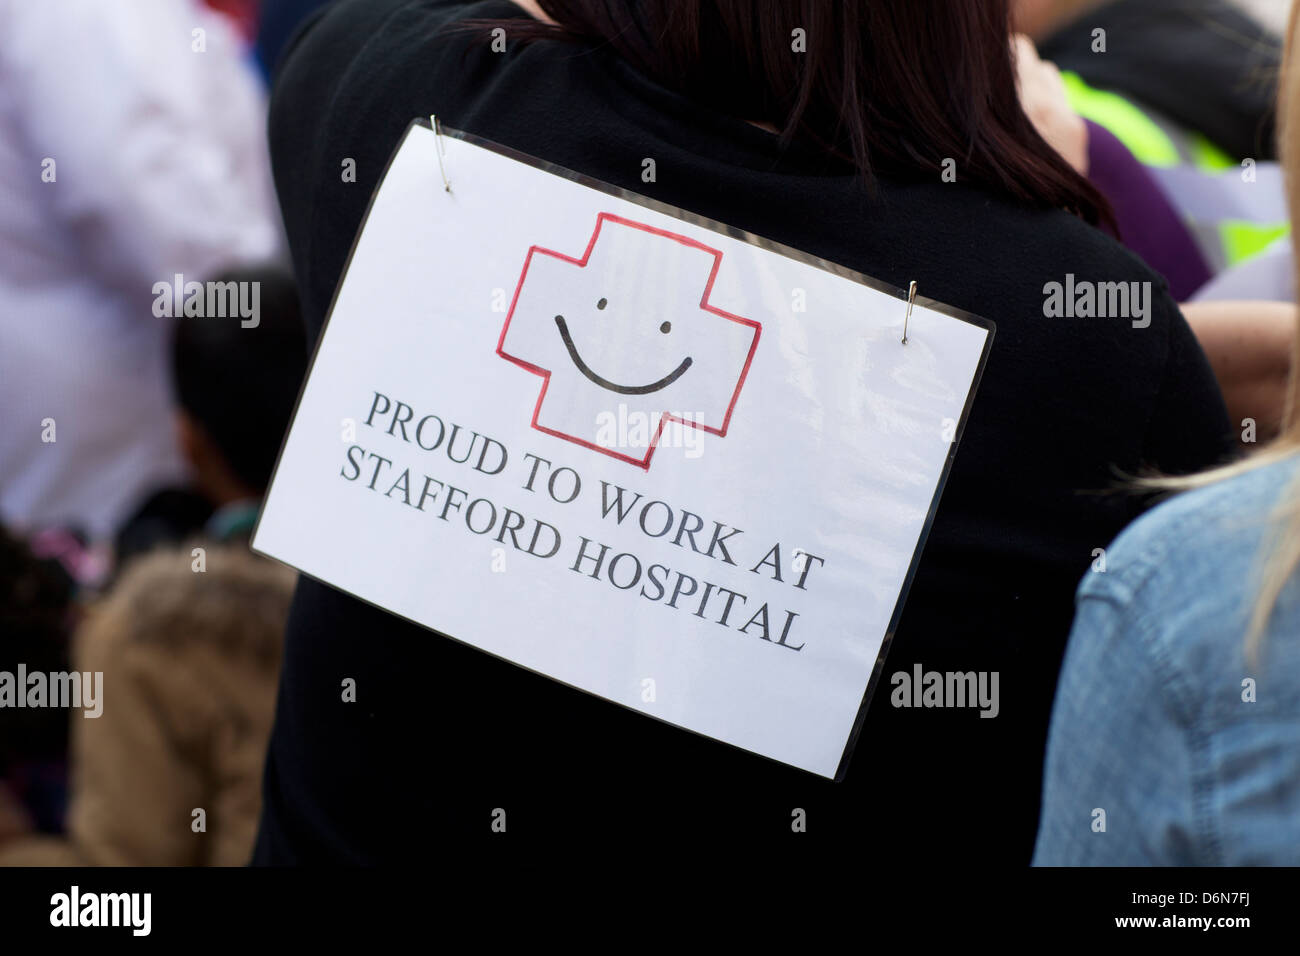 Protesters march through Stafford against cuts to NHS services at Stafford Hospital Stock Photo